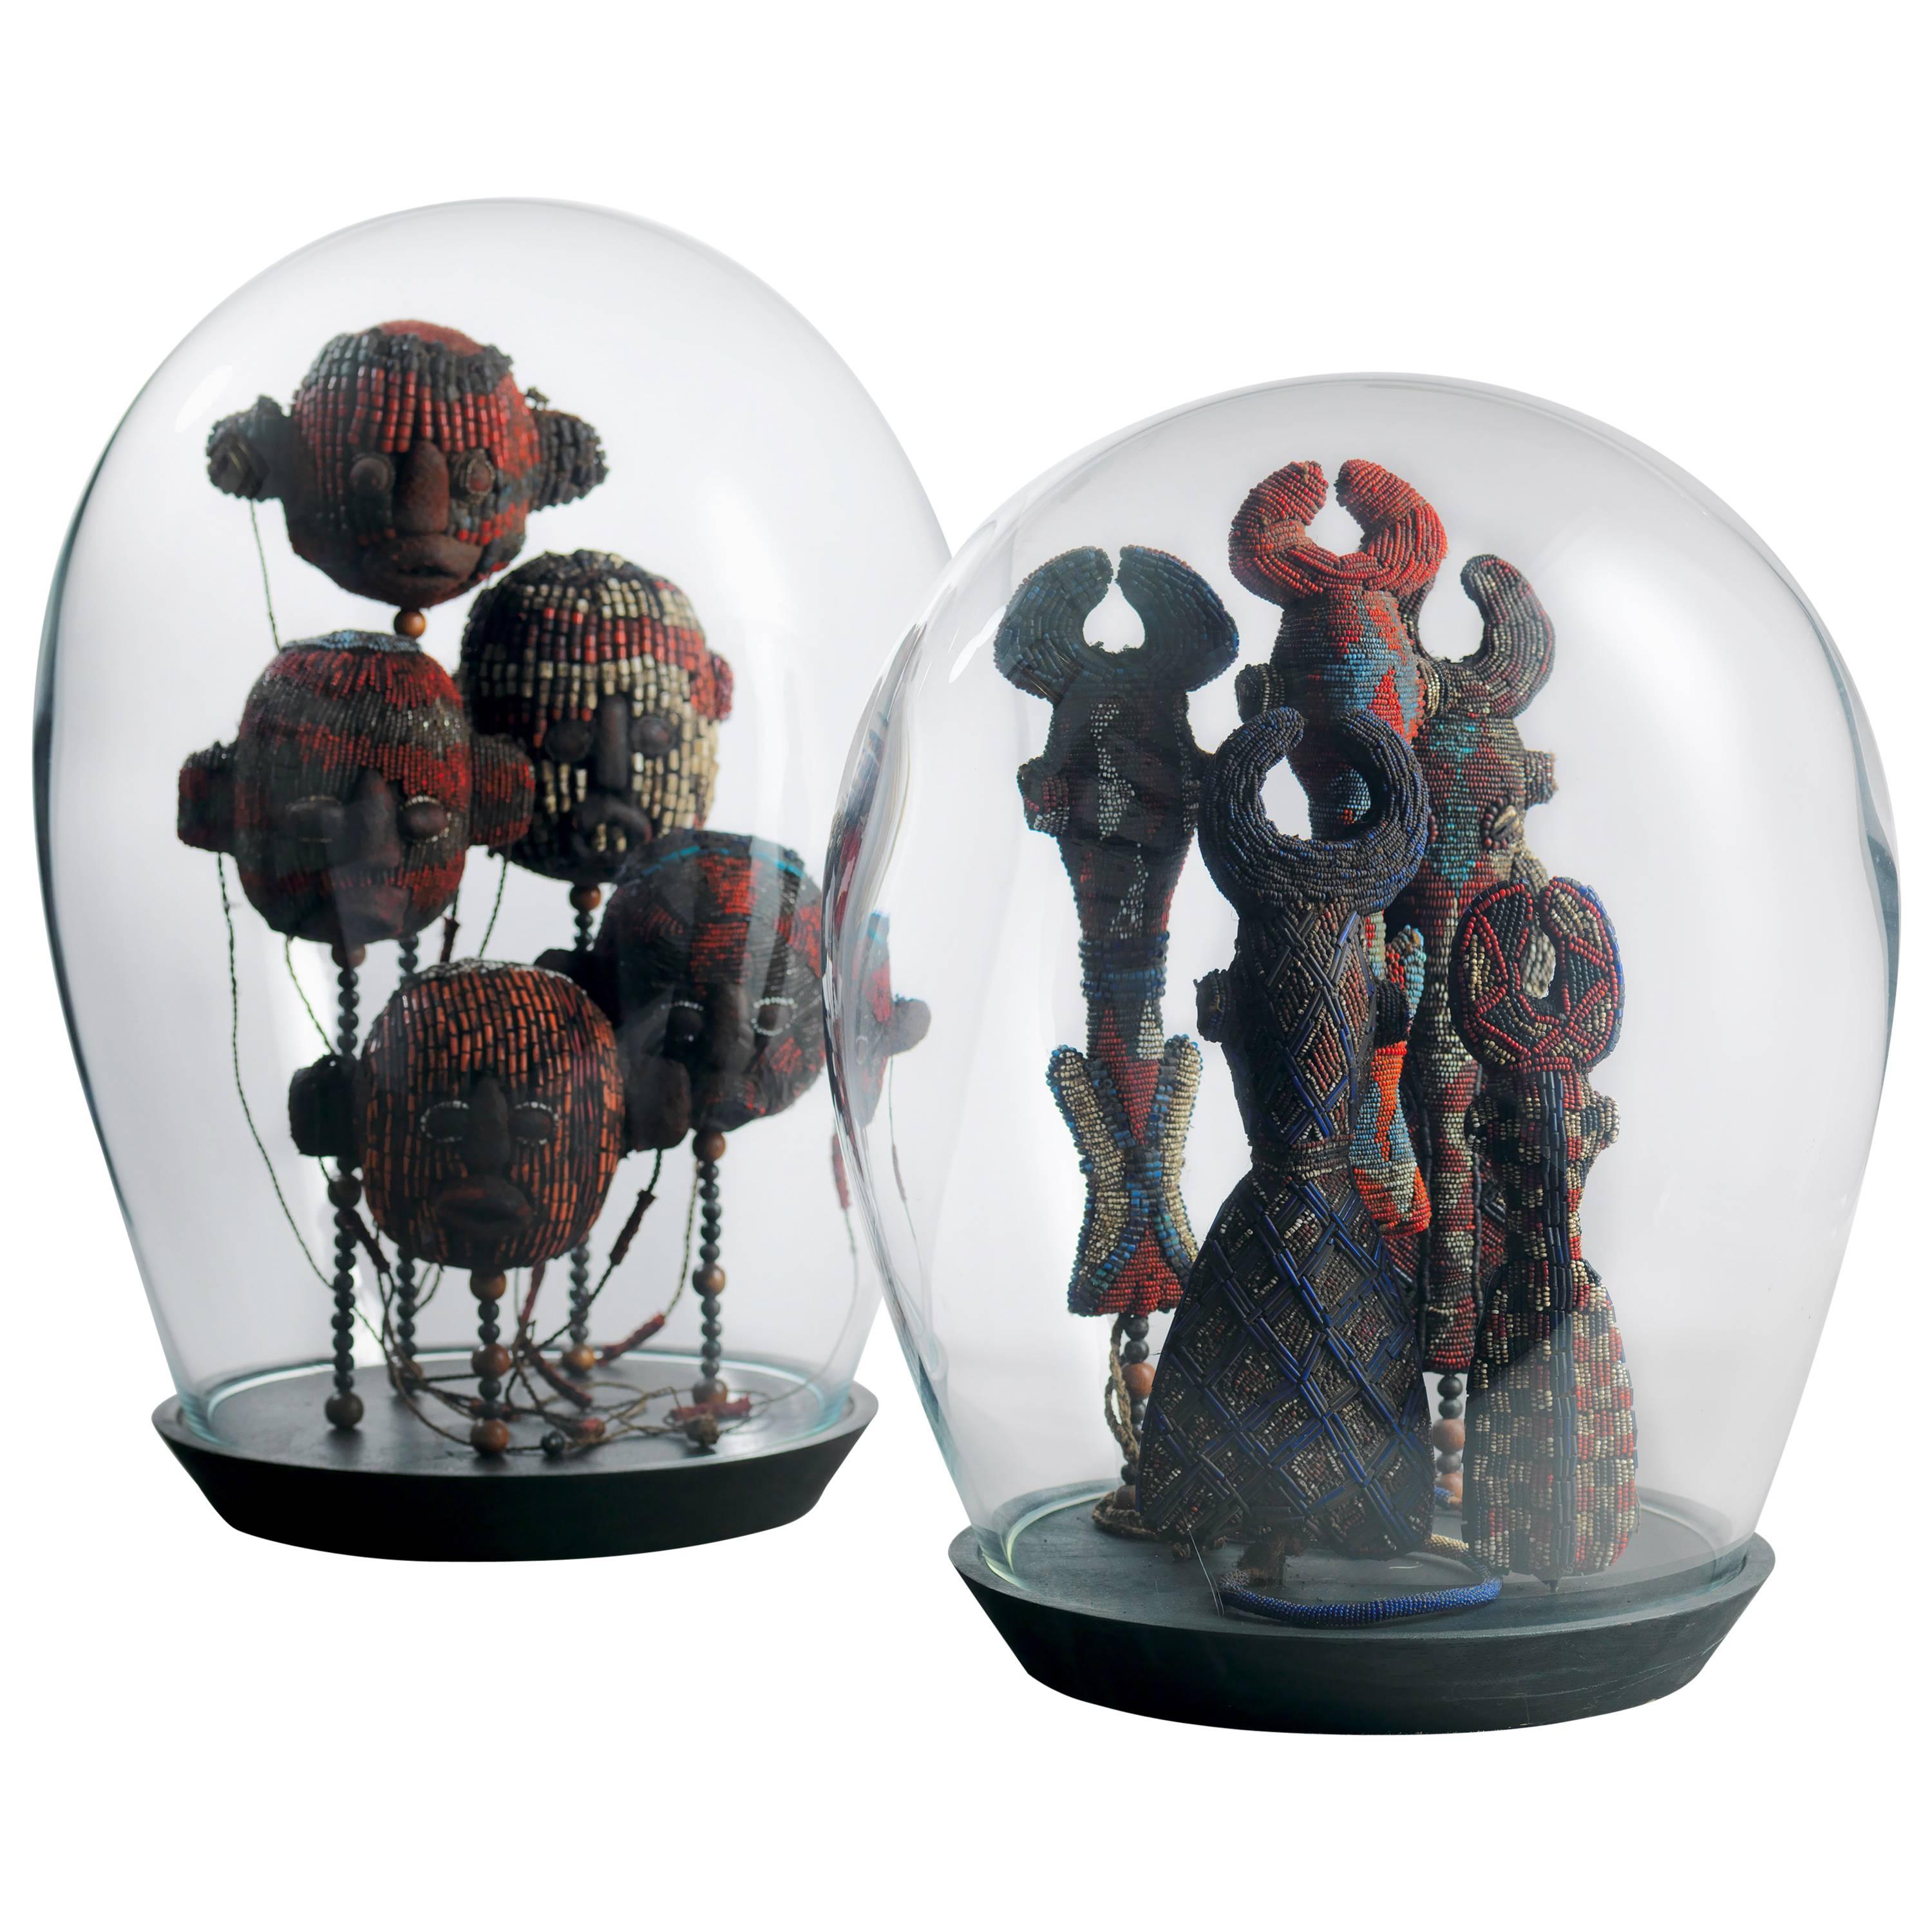 Two Handblown Glass Domes with Fine Beaded Regalia, Cameroon Grasslands